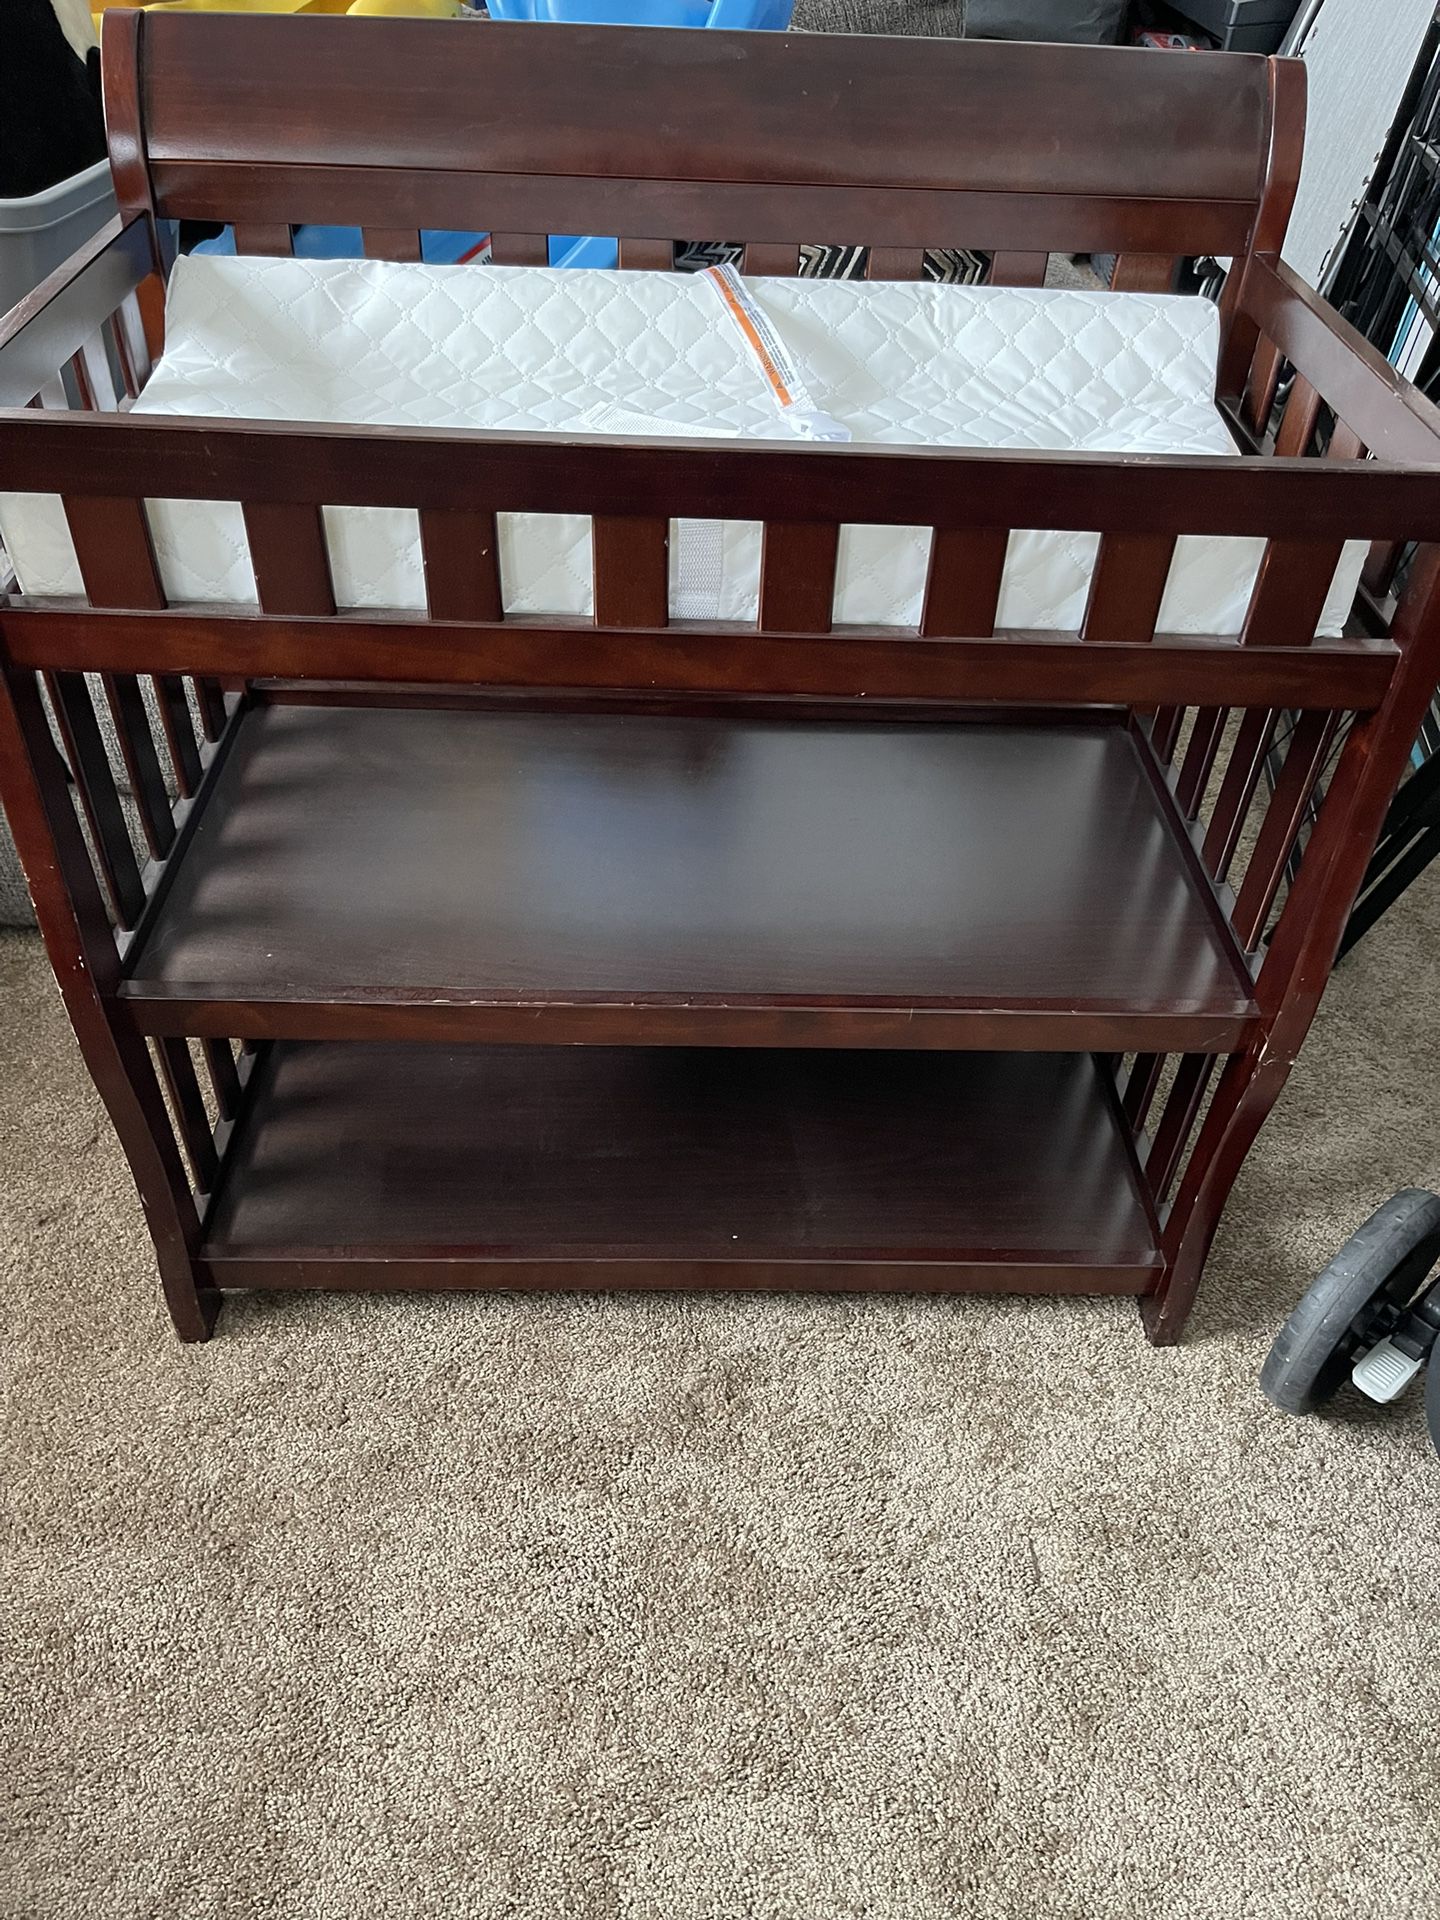 Baby Changing Table Shelf